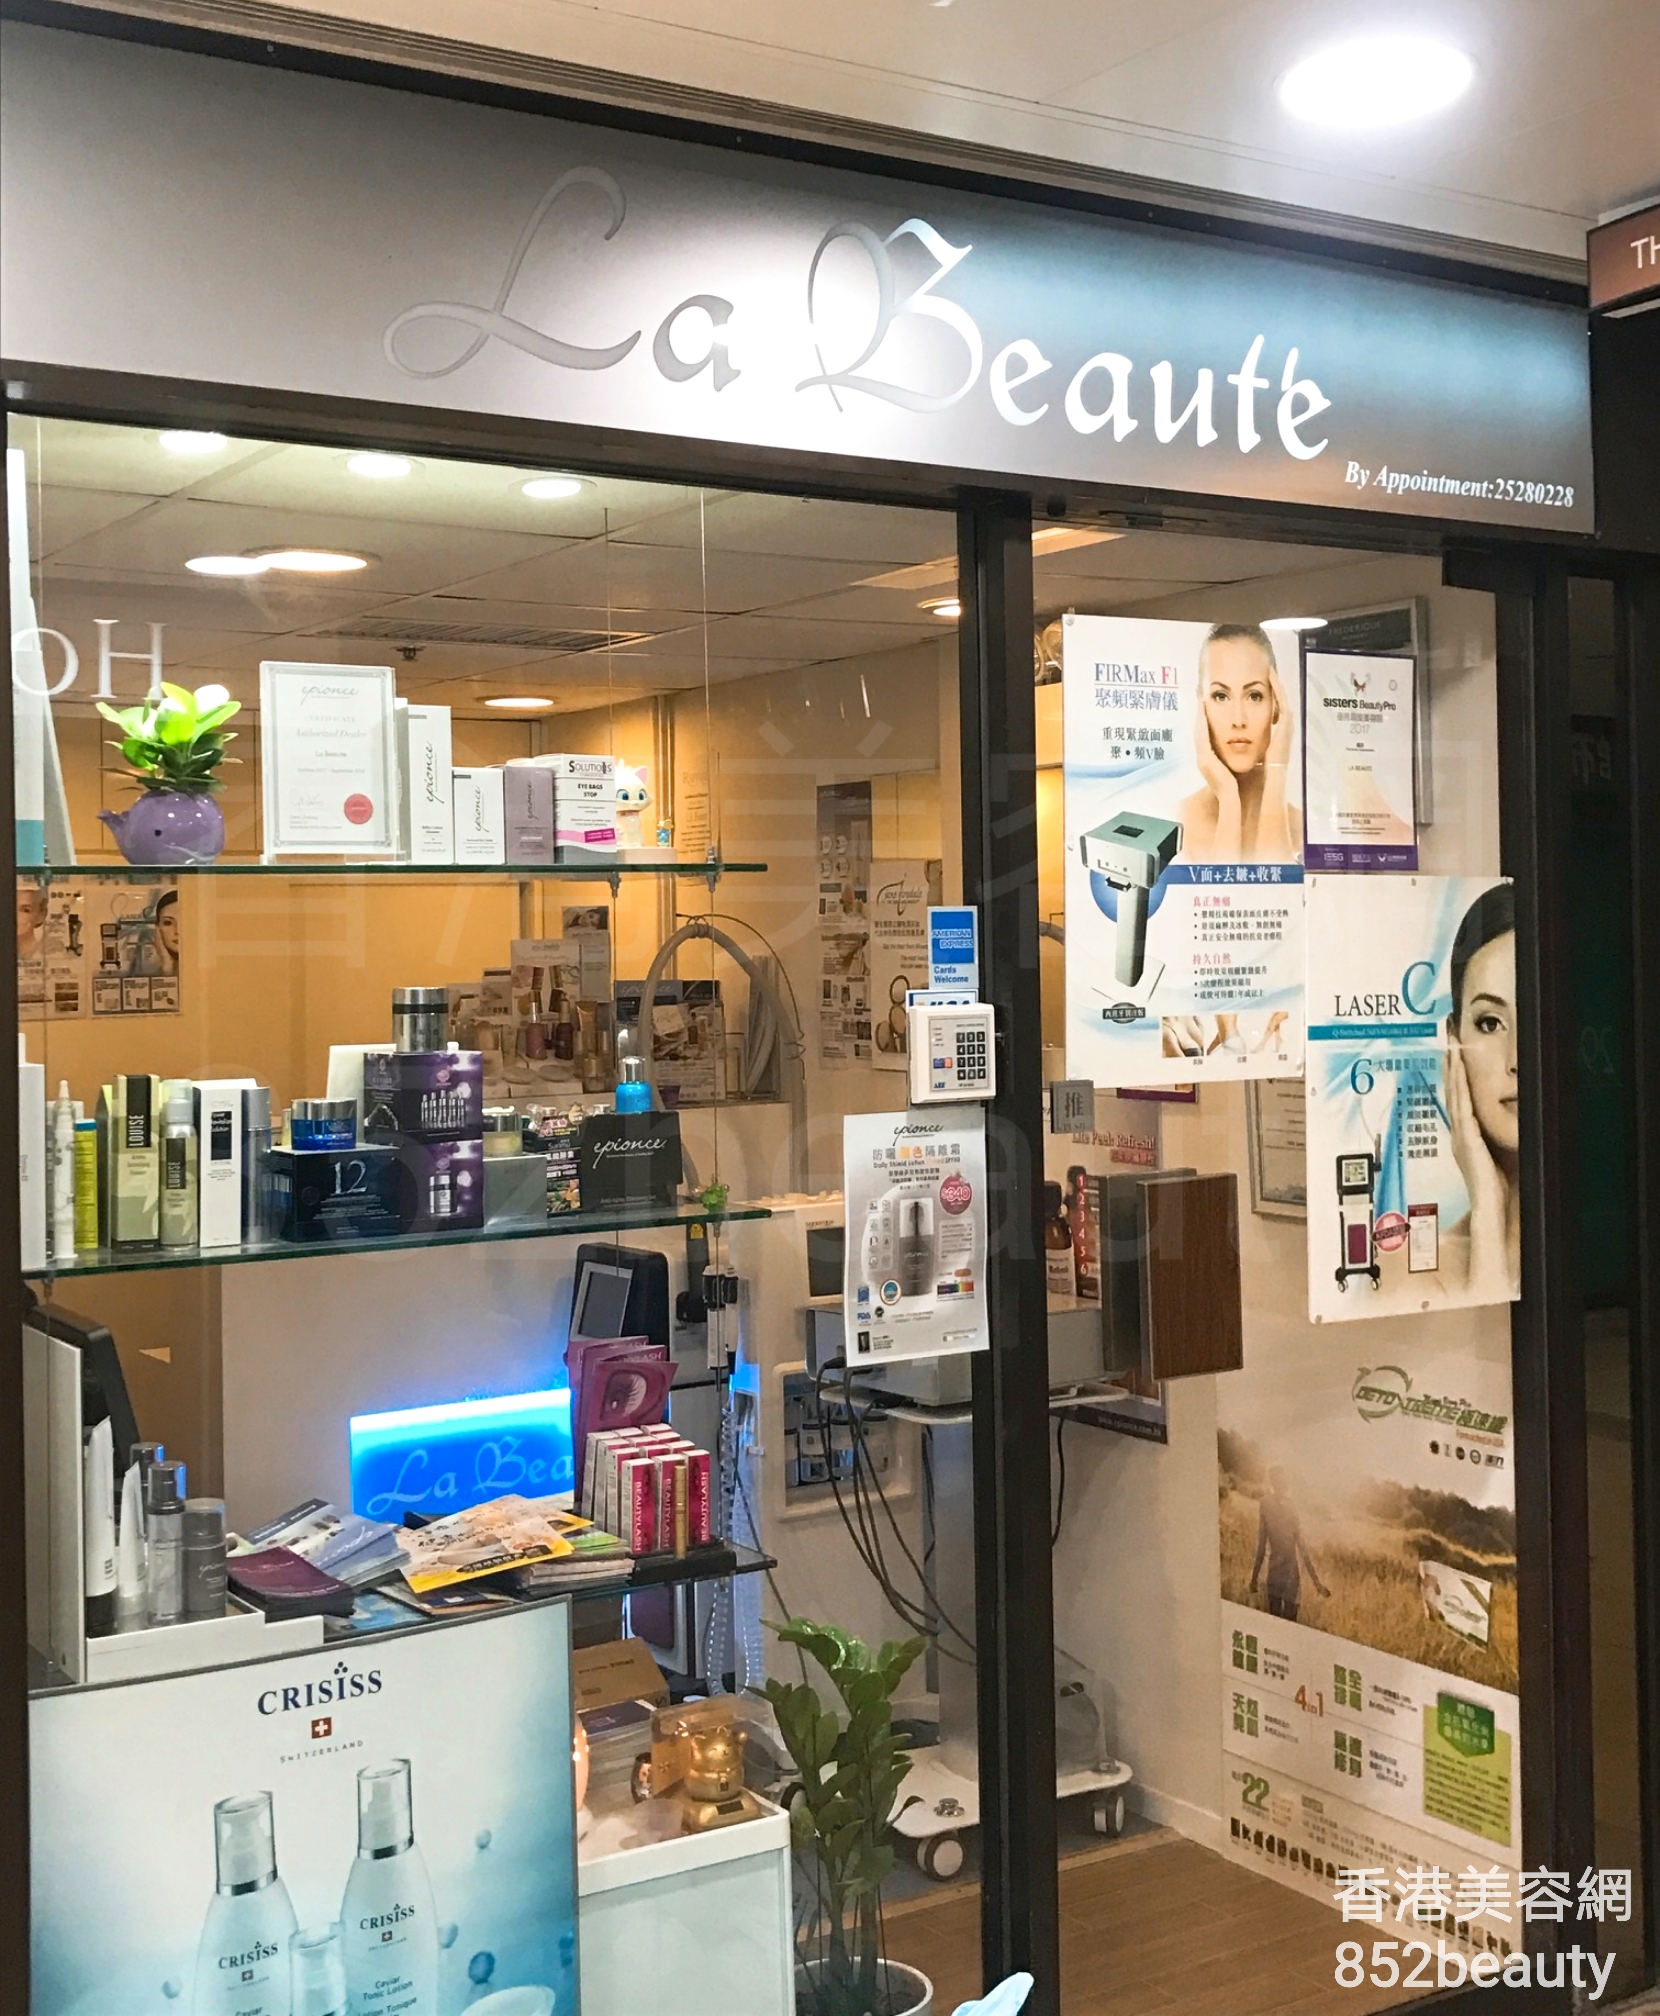 Hand and foot care: La Beaute